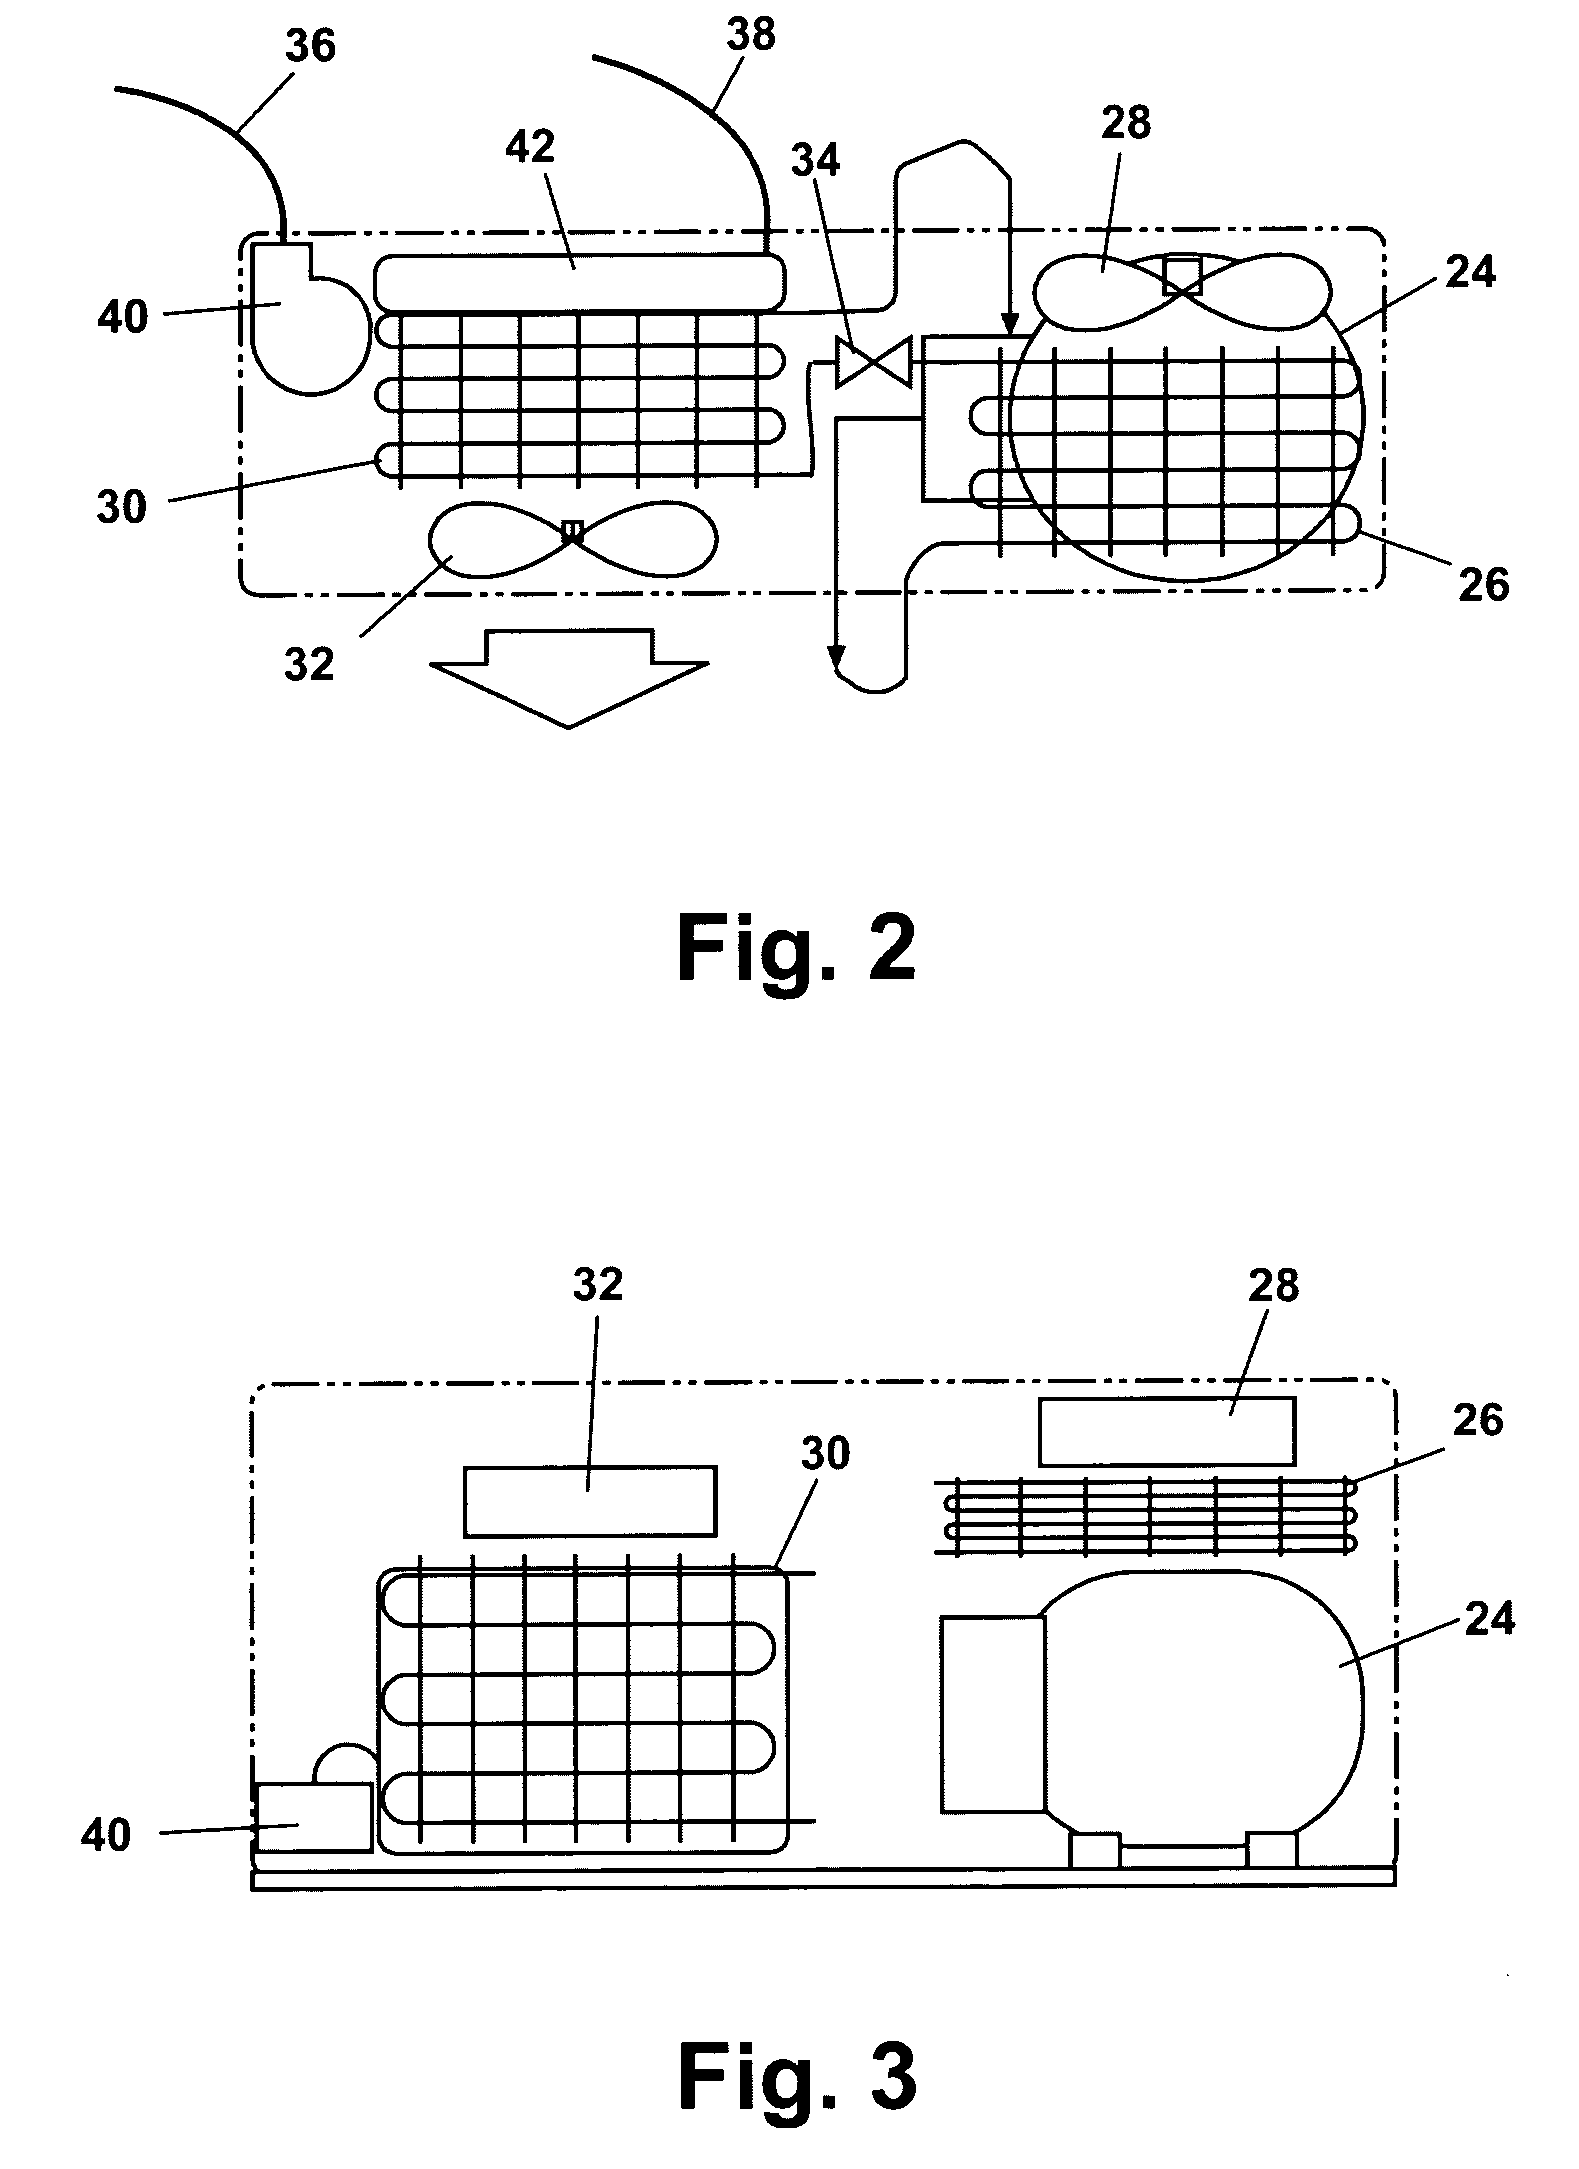 Distributed refrigeration system for a vehicle